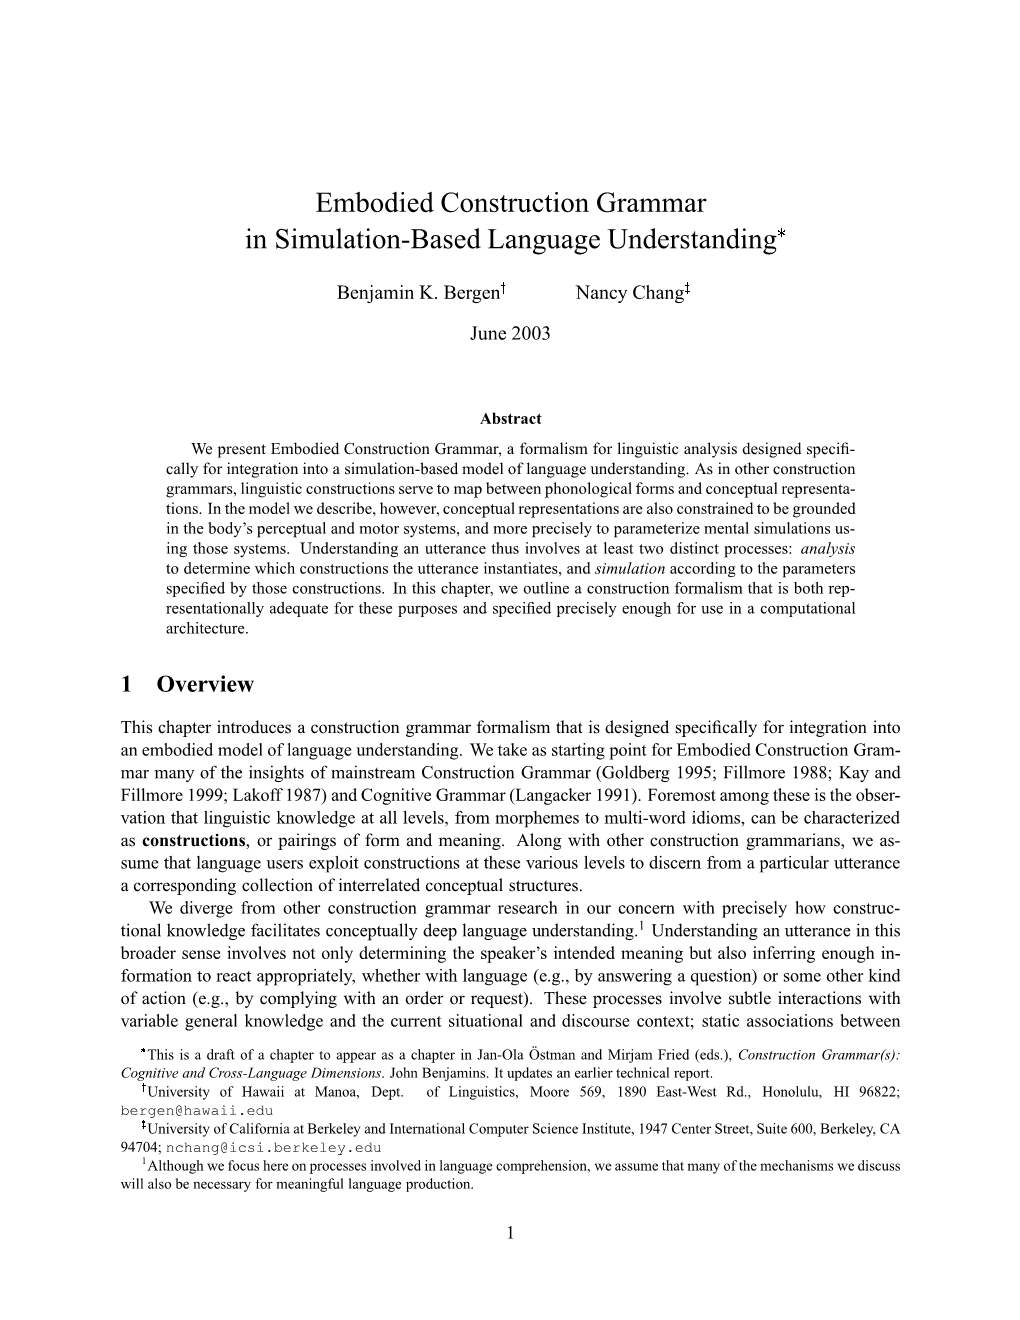 Embodied Construction Grammar in Simulation-Based Language